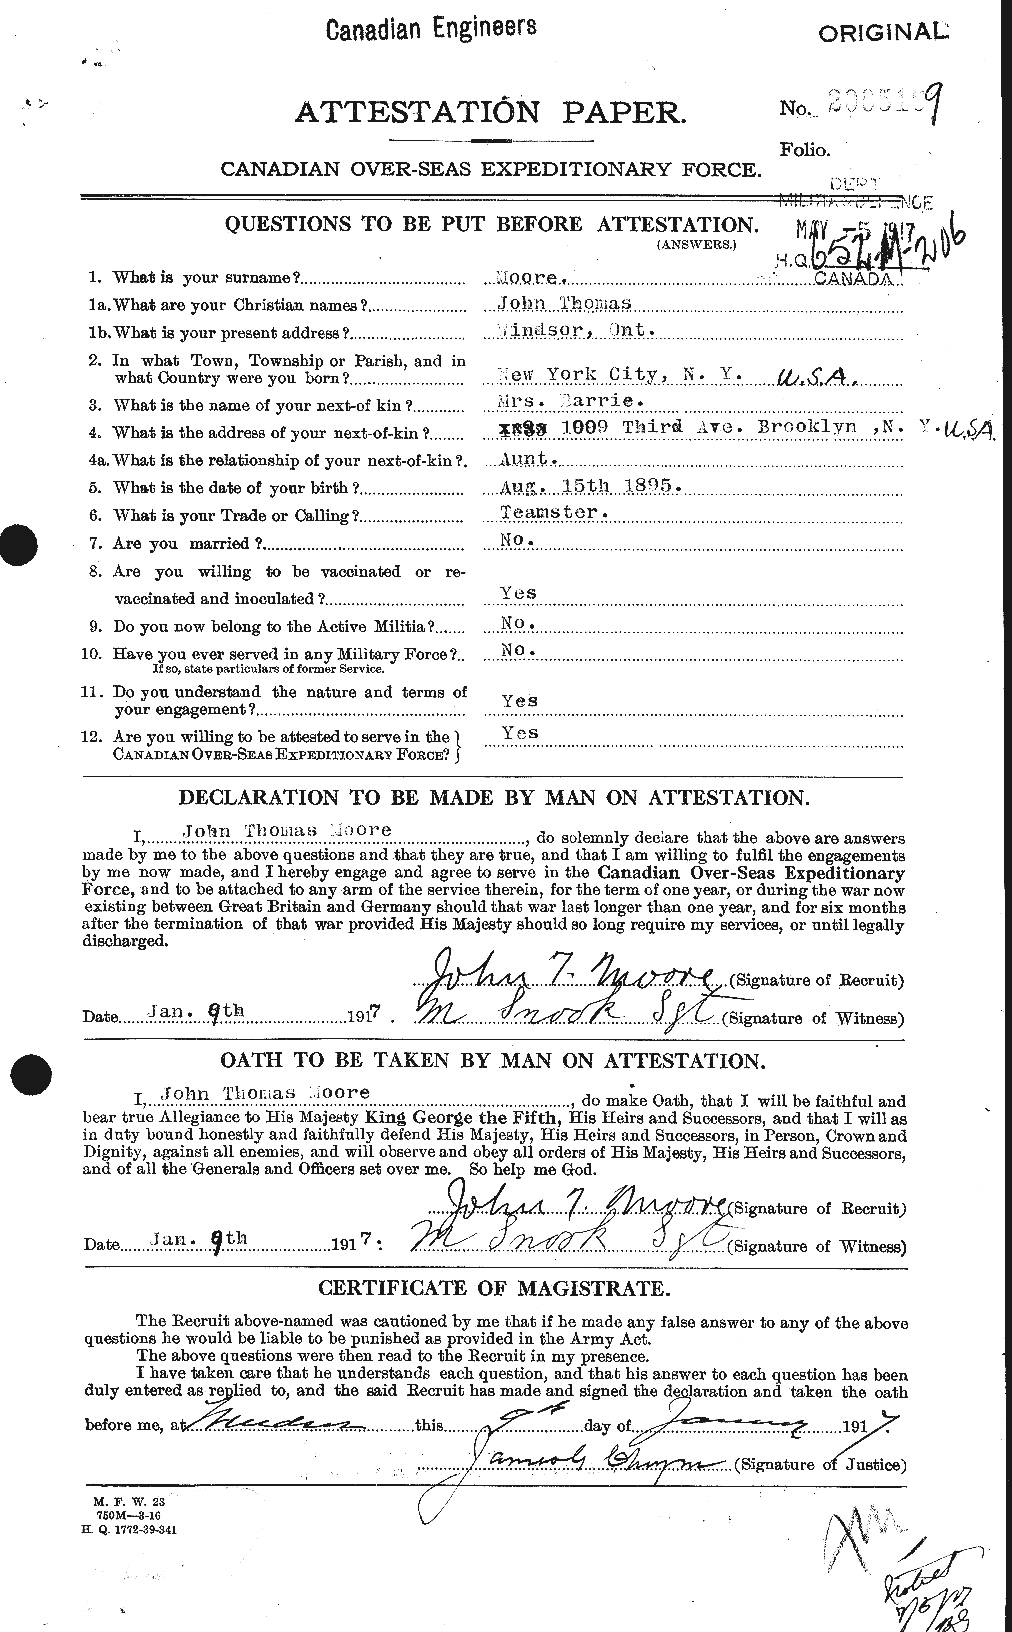 Personnel Records of the First World War - CEF 503337a